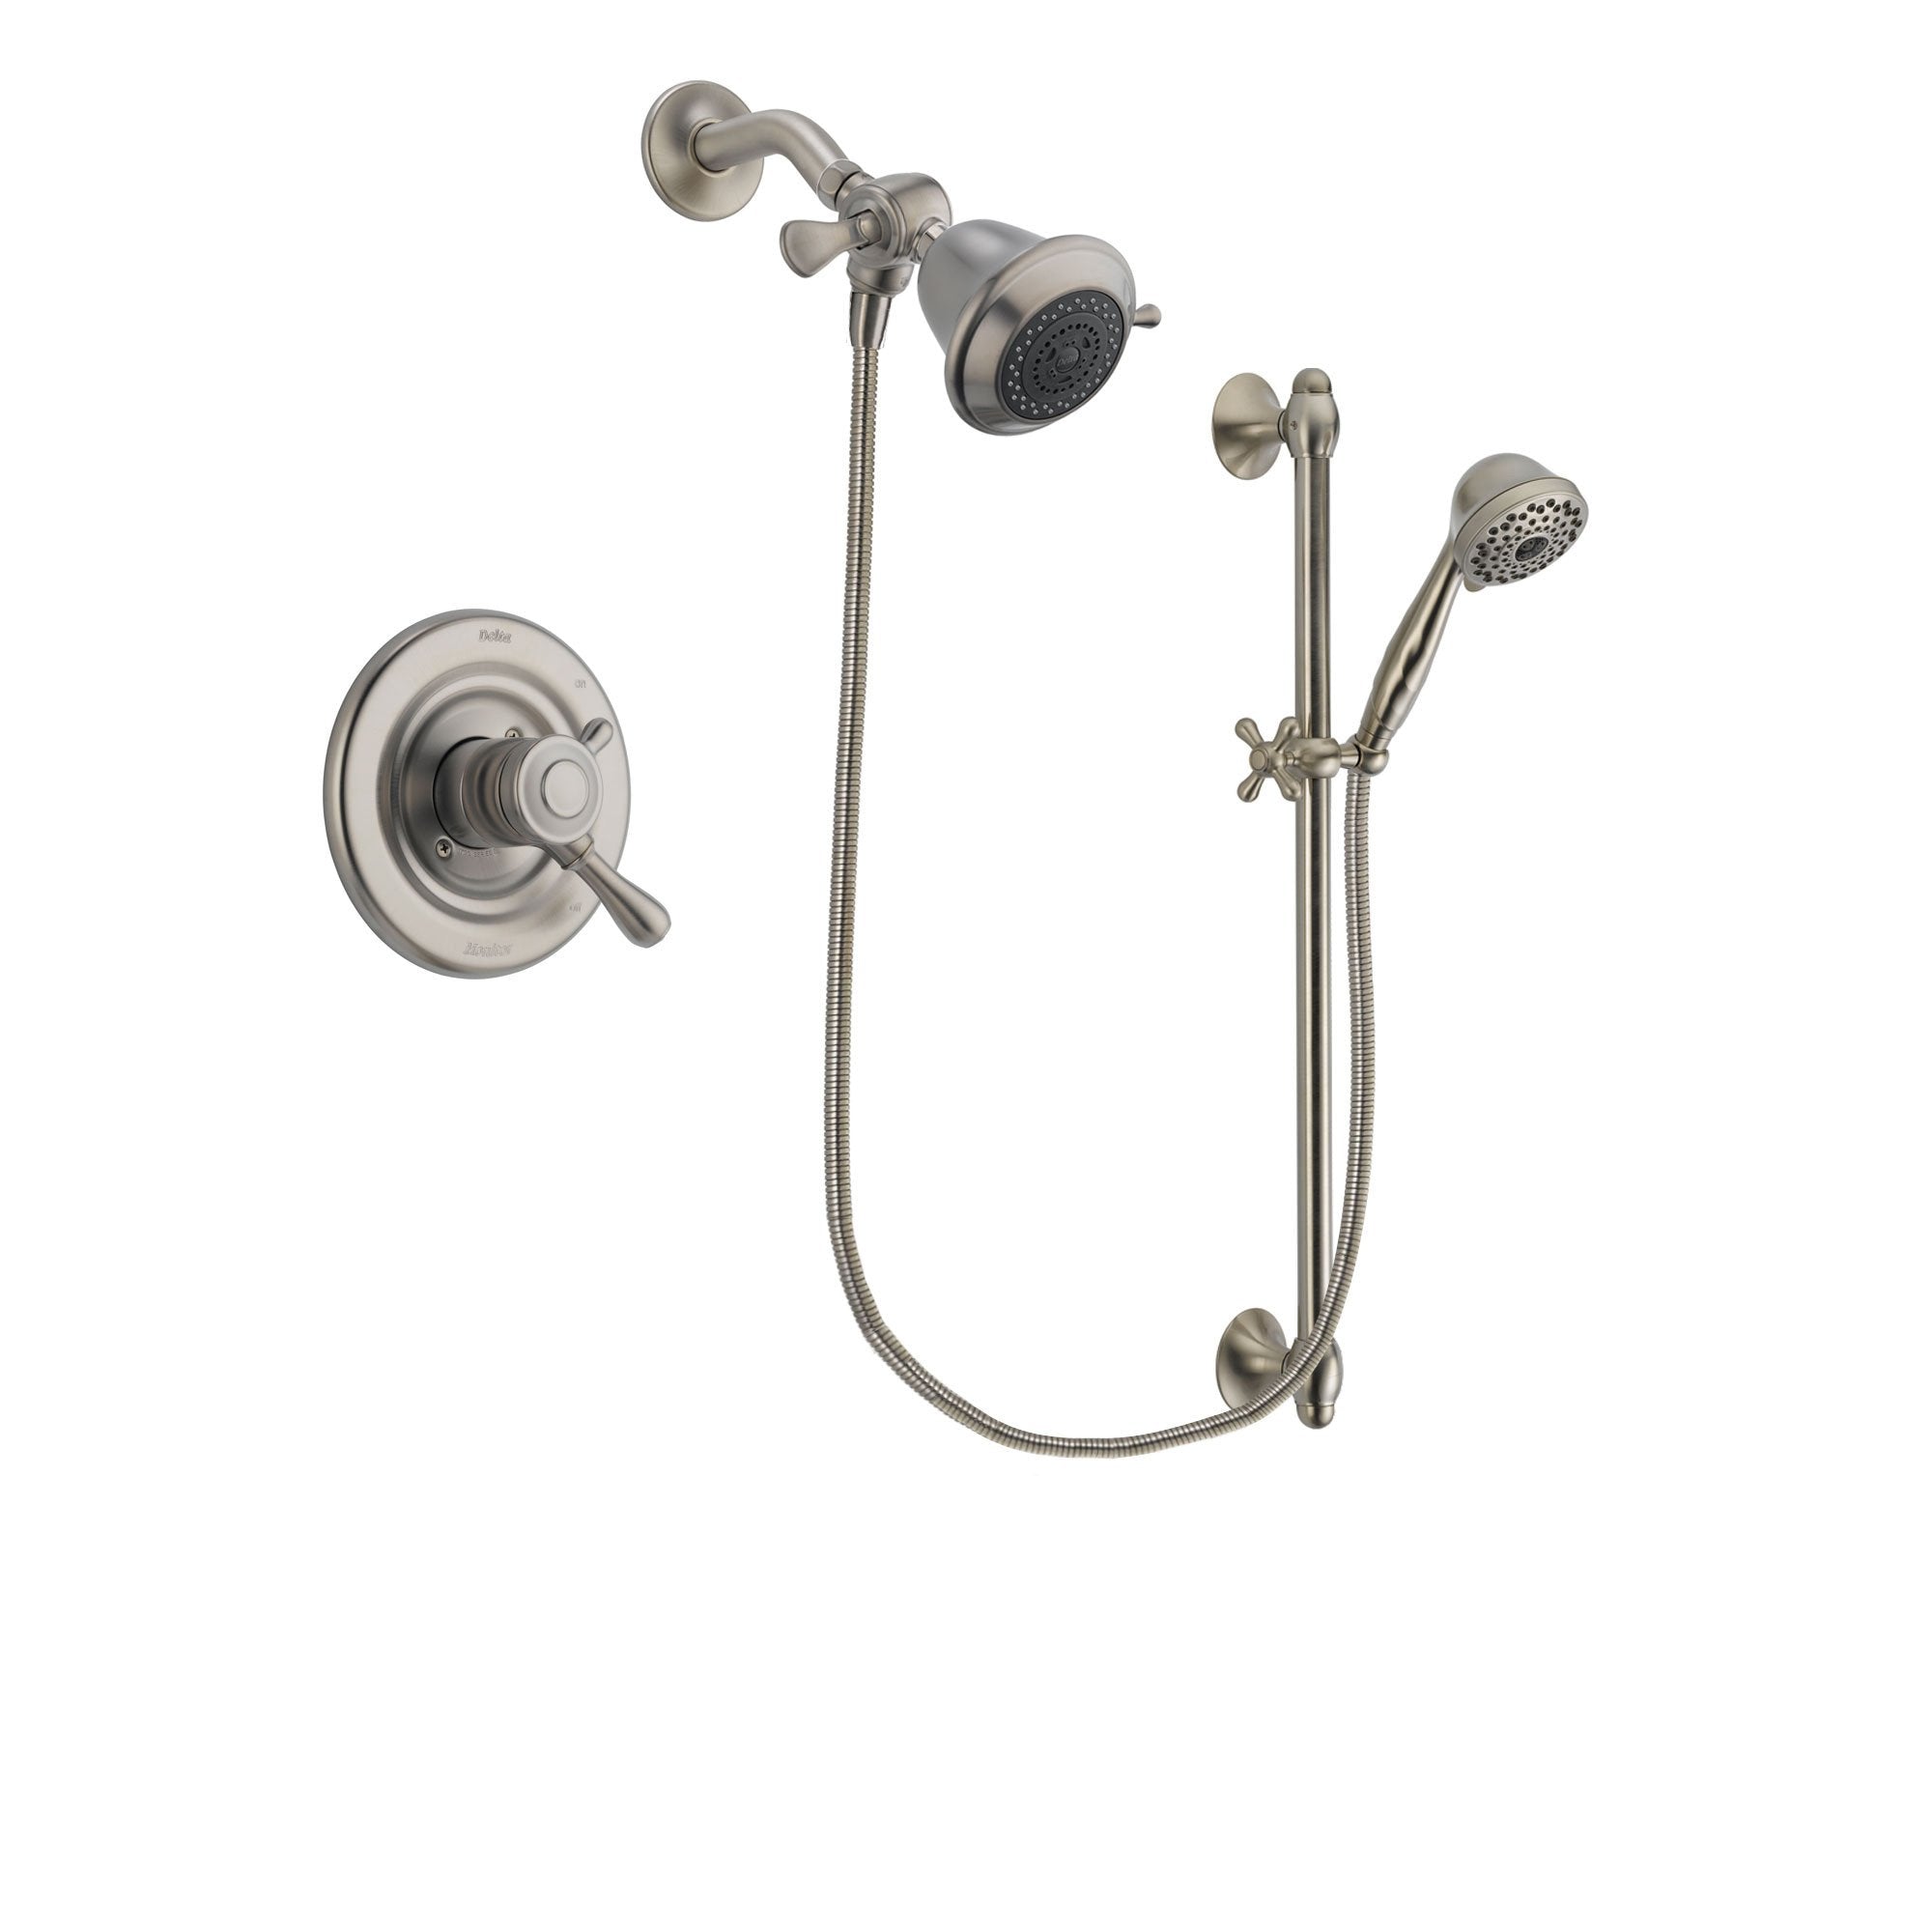 Delta Leland Stainless Steel Finish Dual Control Shower Faucet System Package with Shower Head and 7-Spray Handheld Shower with Slide Bar Includes Rough-in Valve DSP1676V